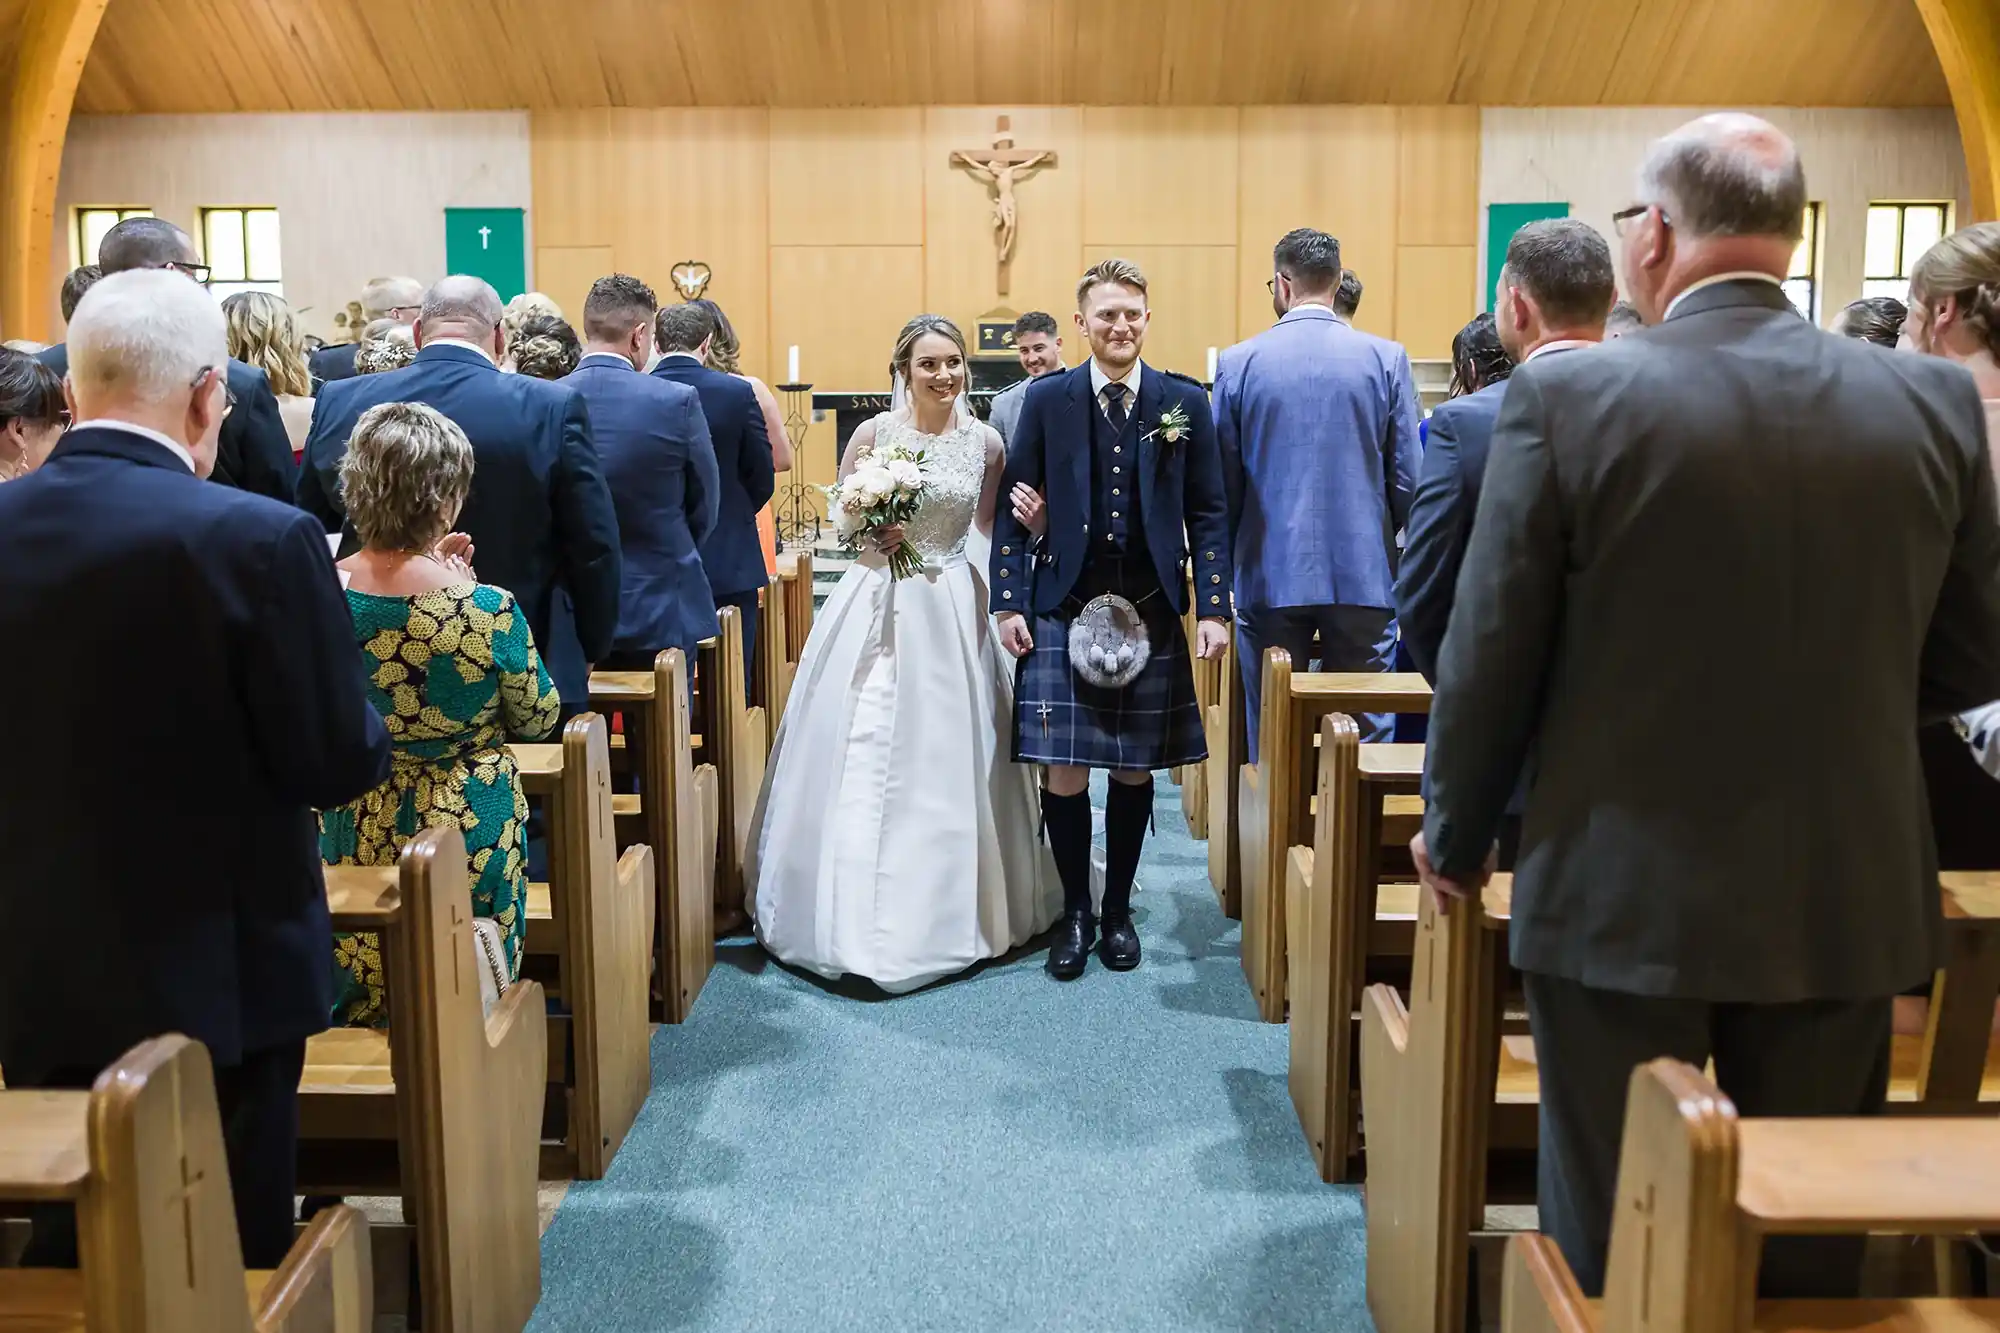 Bride in a white dress and groom in a kilt holding hands as they walk down the aisle of a church, surrounded by guests standing in the pews.